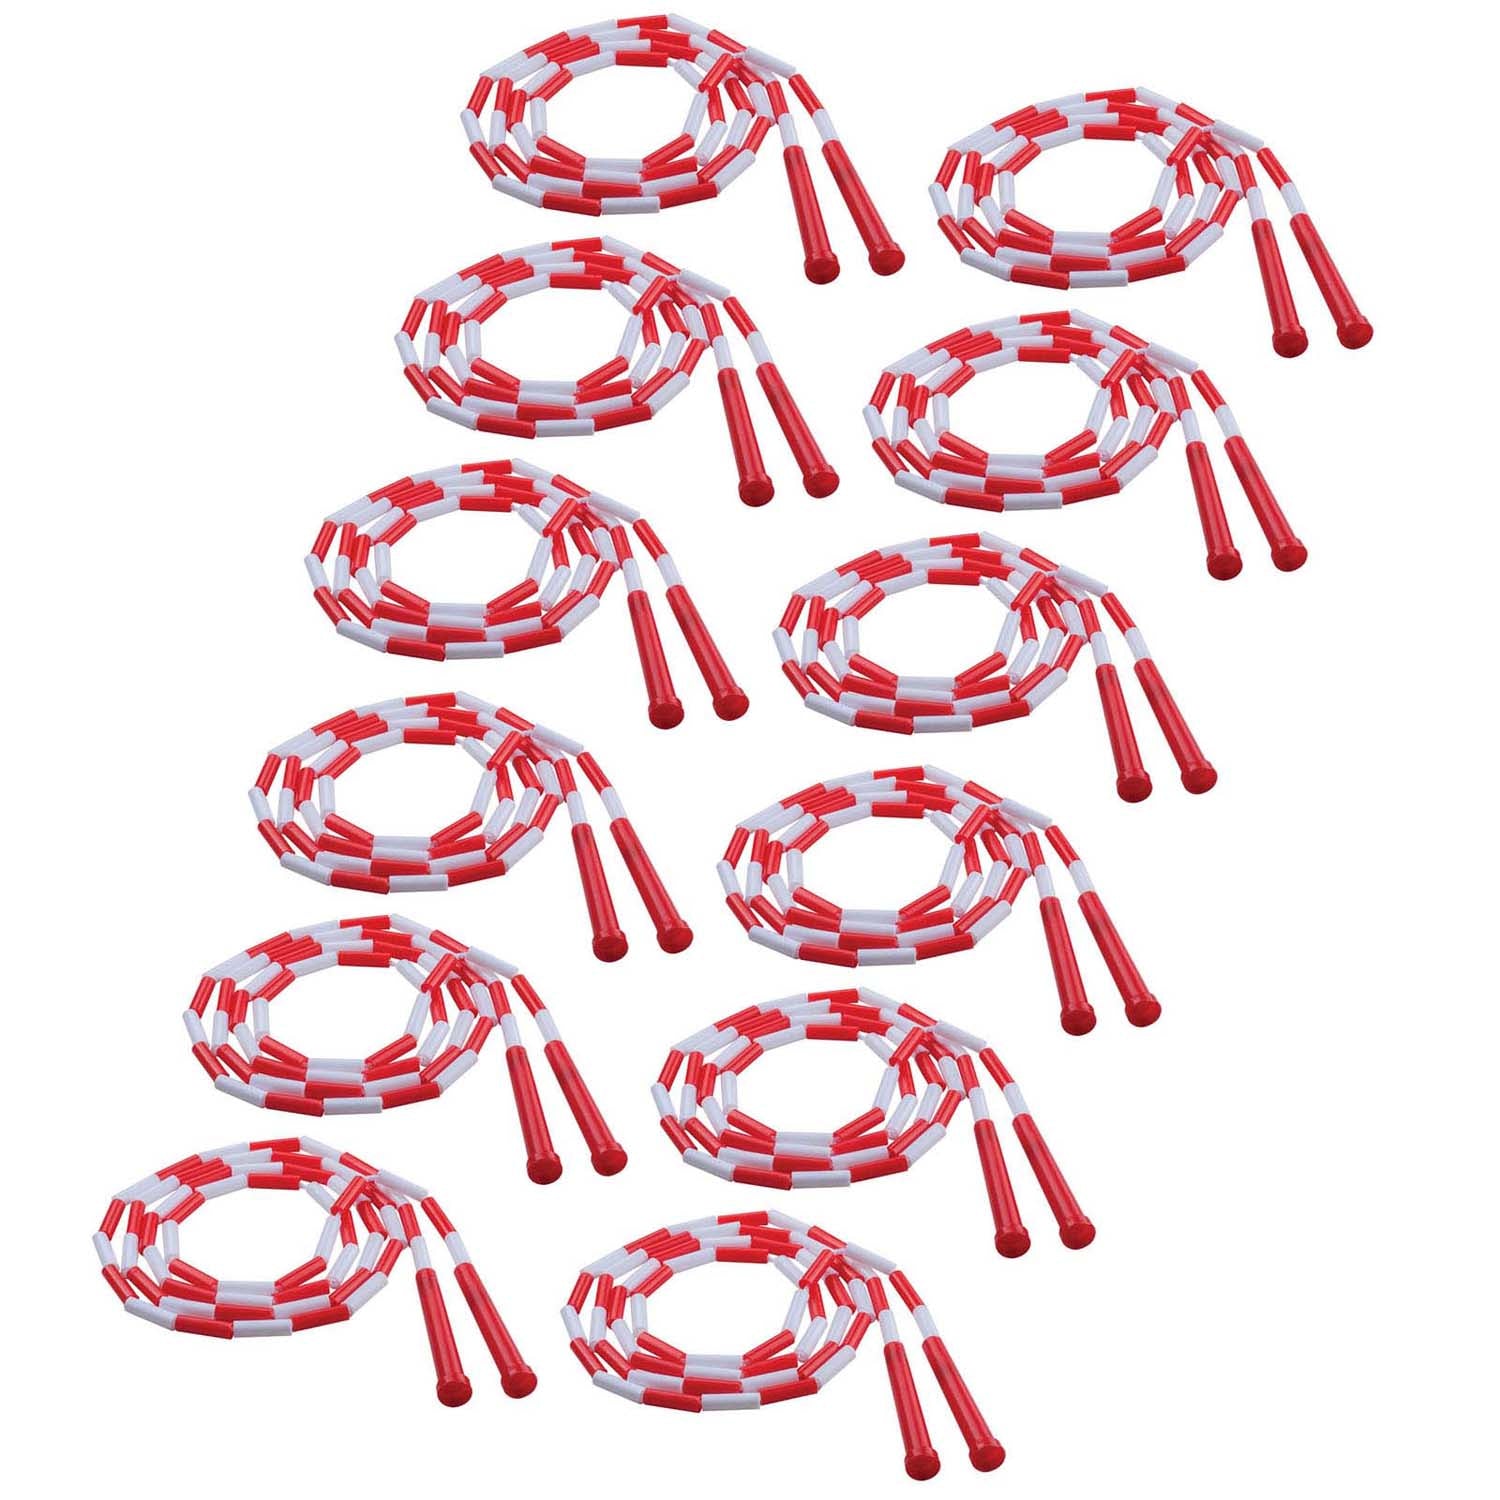 Plastic Segmented Jump Rope 7', Red & White, Pack of 12 - A1 School Supplies